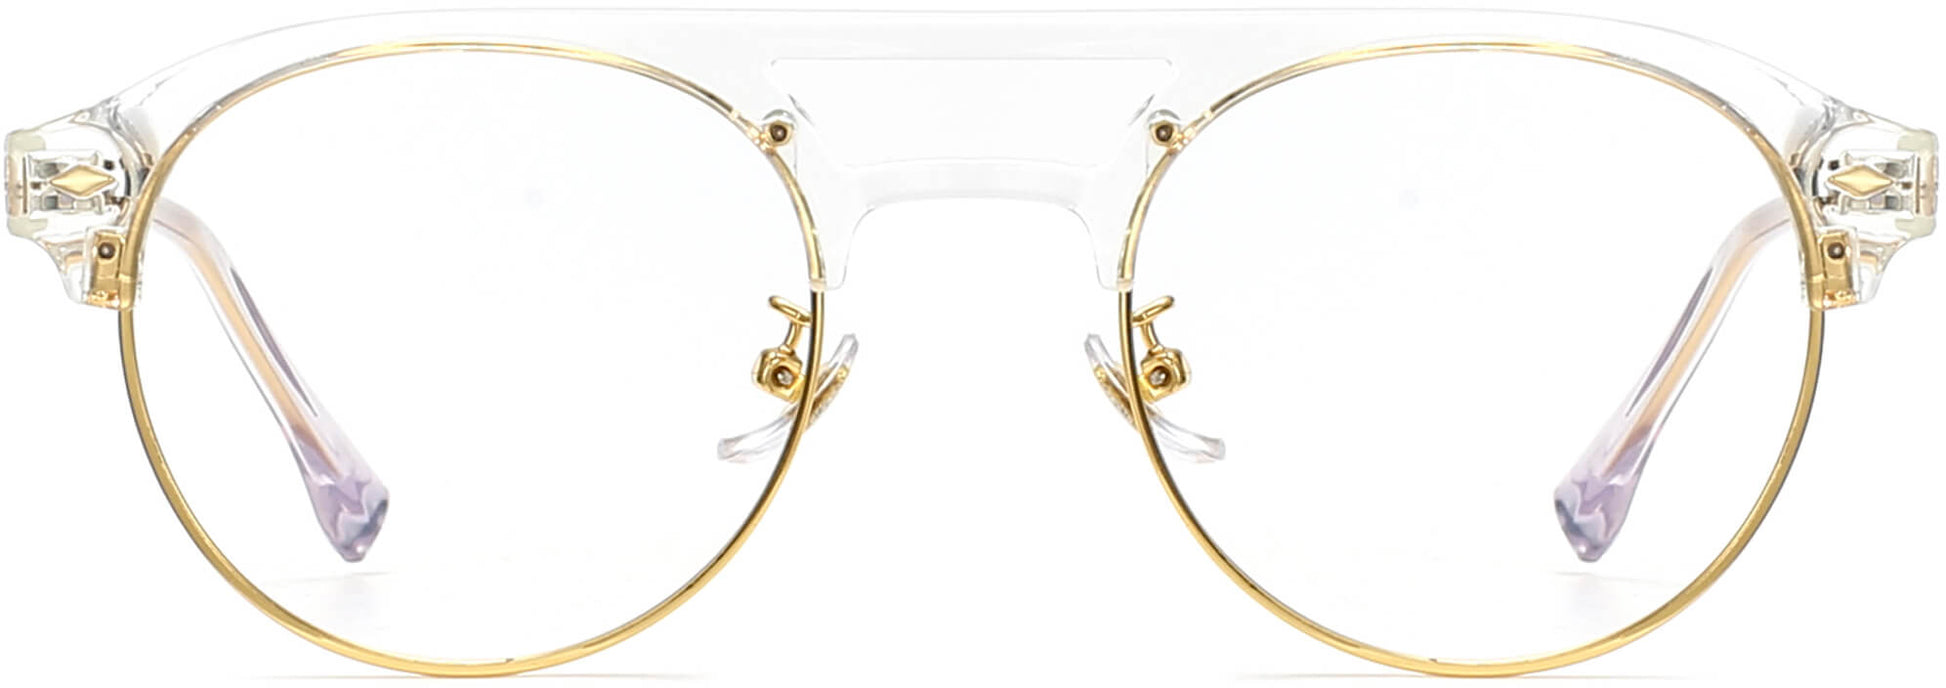 Kason Round Clear Eyeglasses from ANRRI, front view